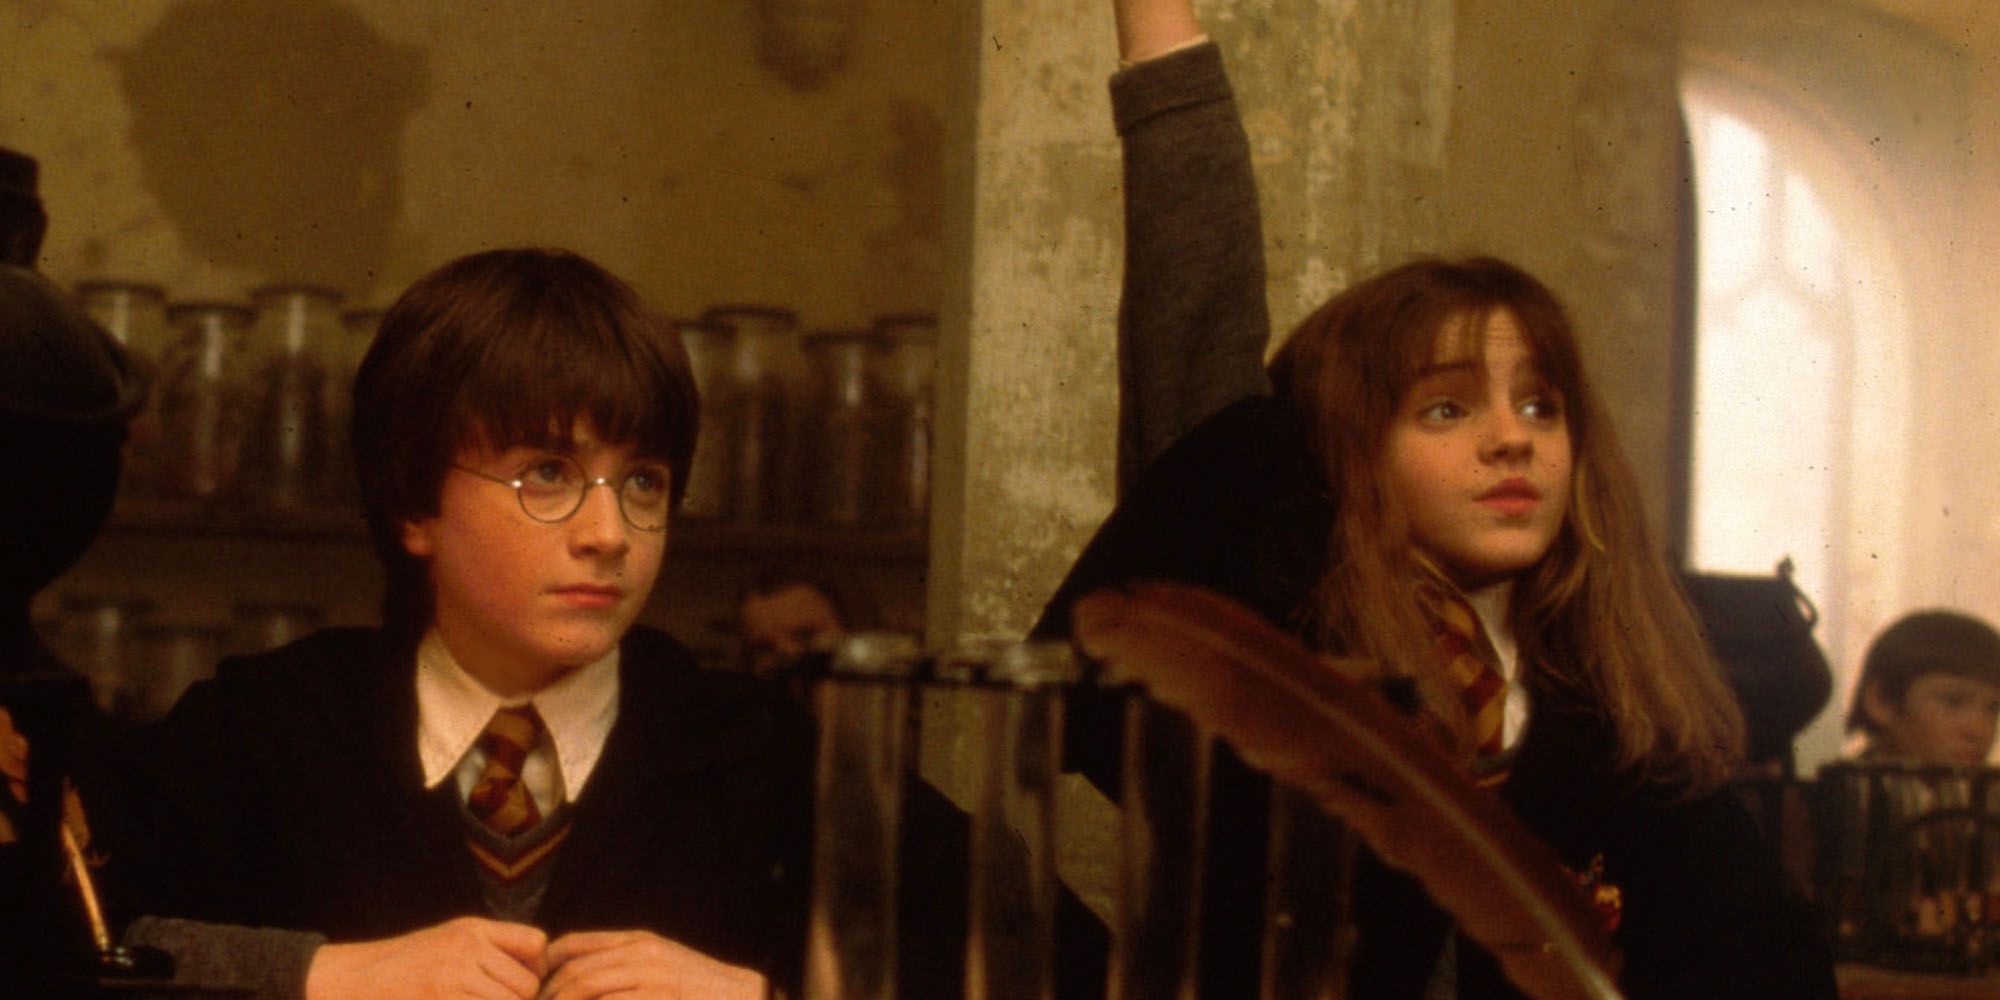 Daniel Radcliffe as a sullen Harry Potter and Emma Watson as an eager Hermione Granger, raising her hand, in Potions class in Harry Potter and the Sorcerer's Stone